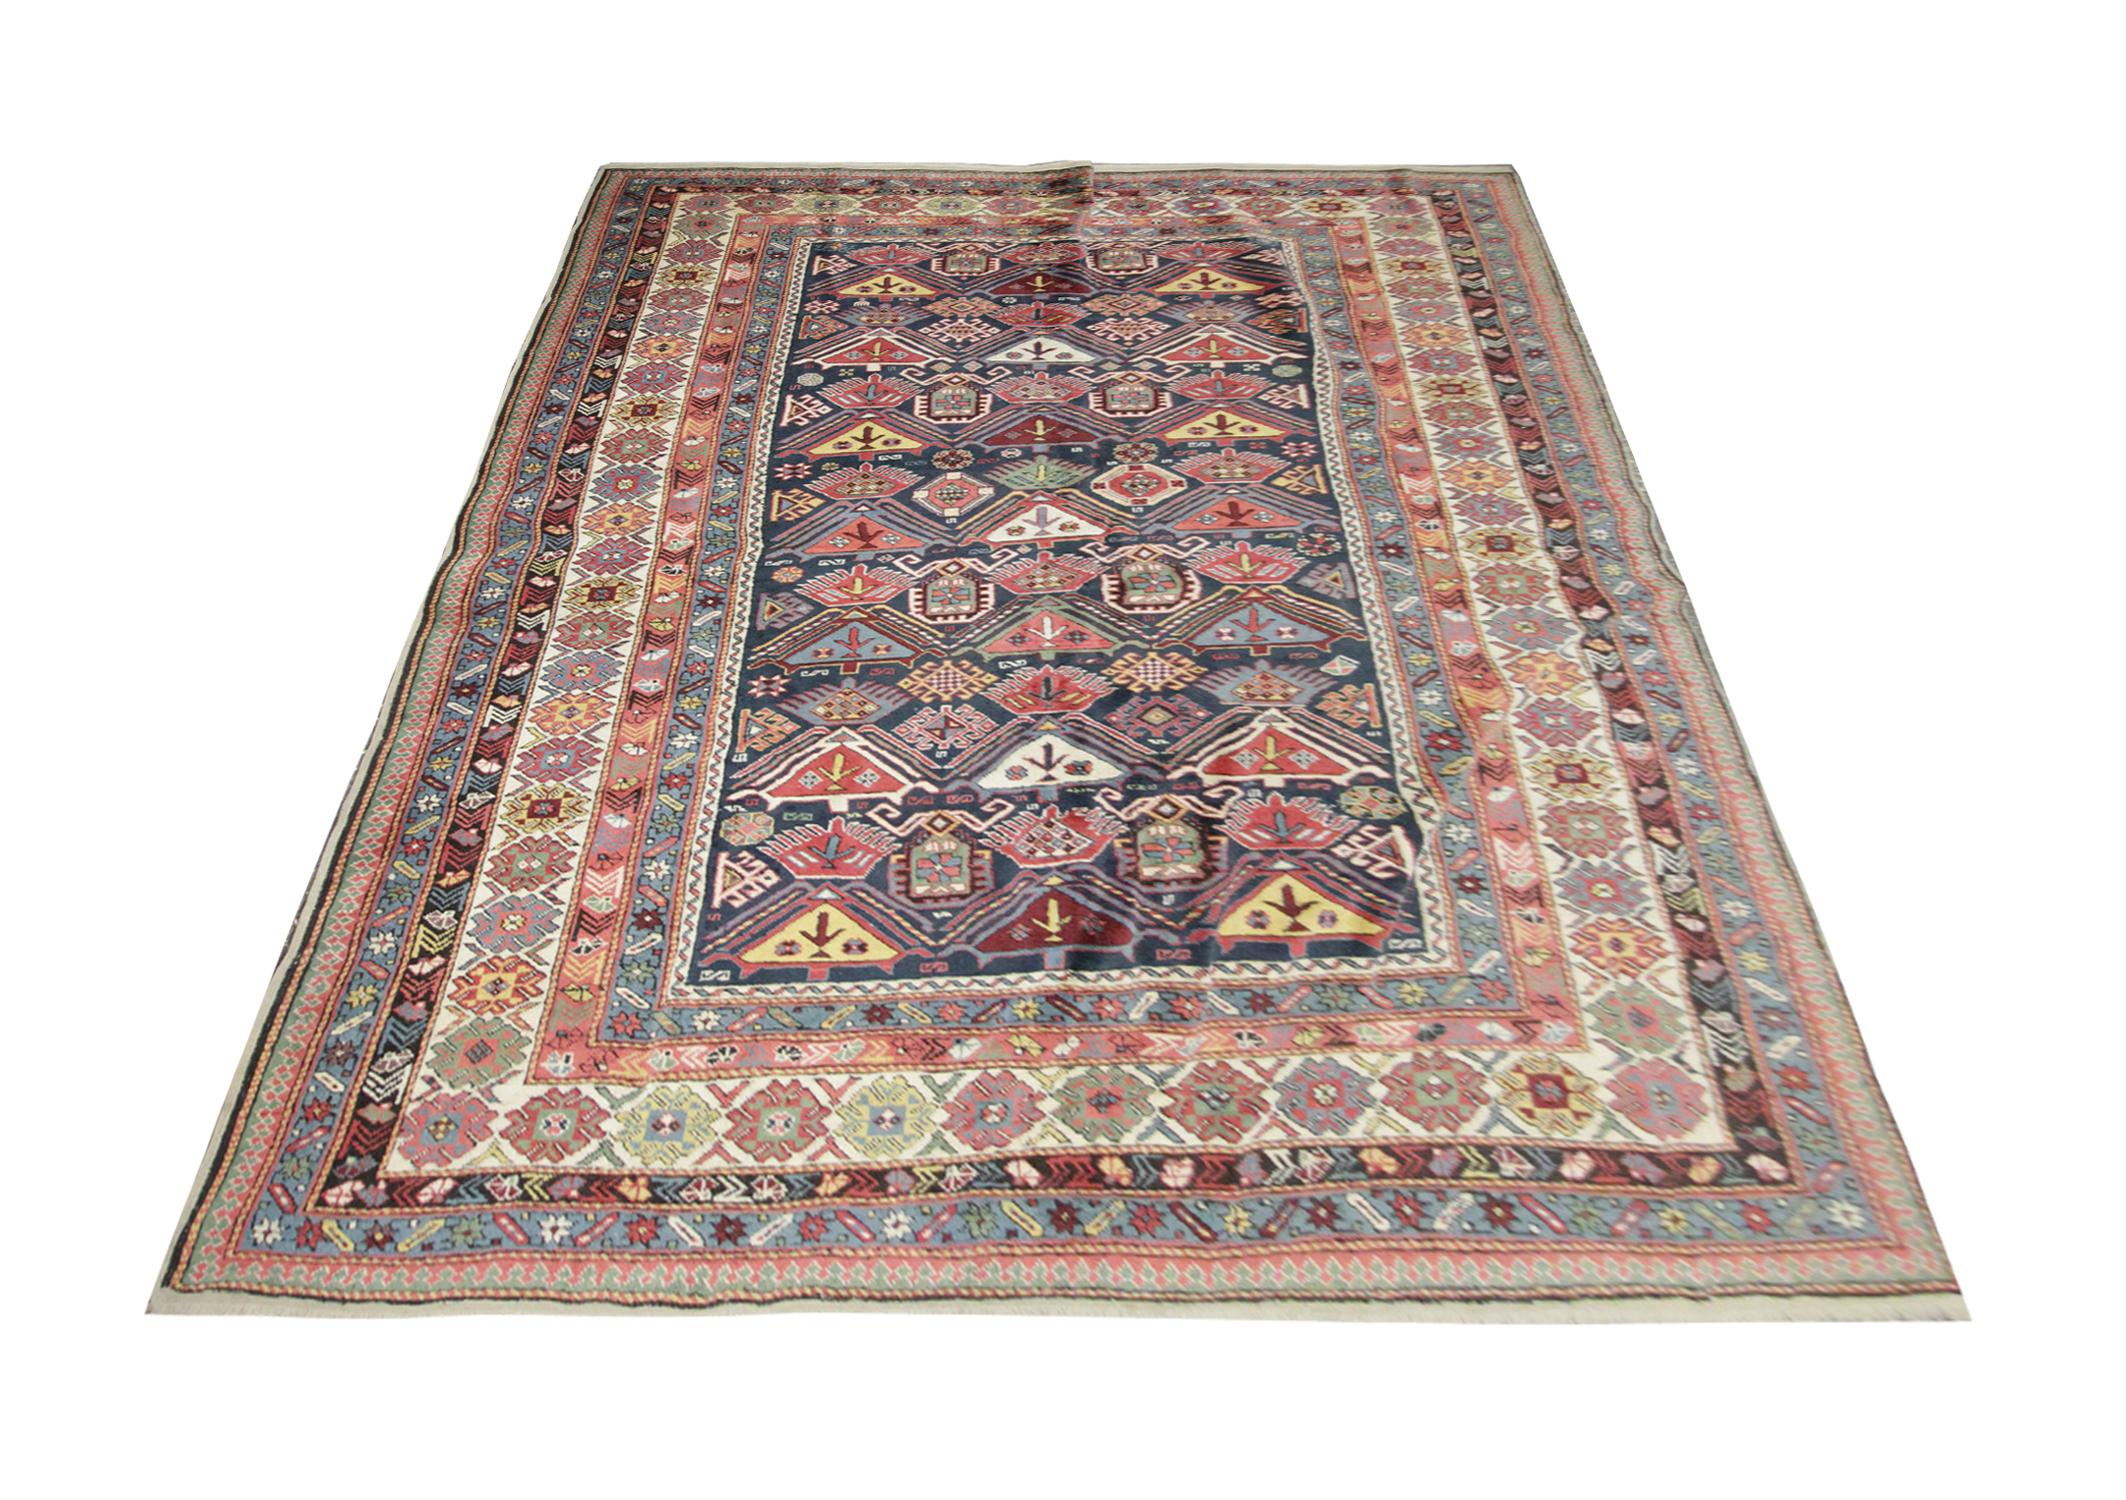 This oriental rug originates from Shirvan, Azerbaijan; it has been woven by hand with handspun wool, which has been dyed with 100% organic vegetable dyes. With a multi-layered border and a symmetrical pattern, this rug will truly Stand out against